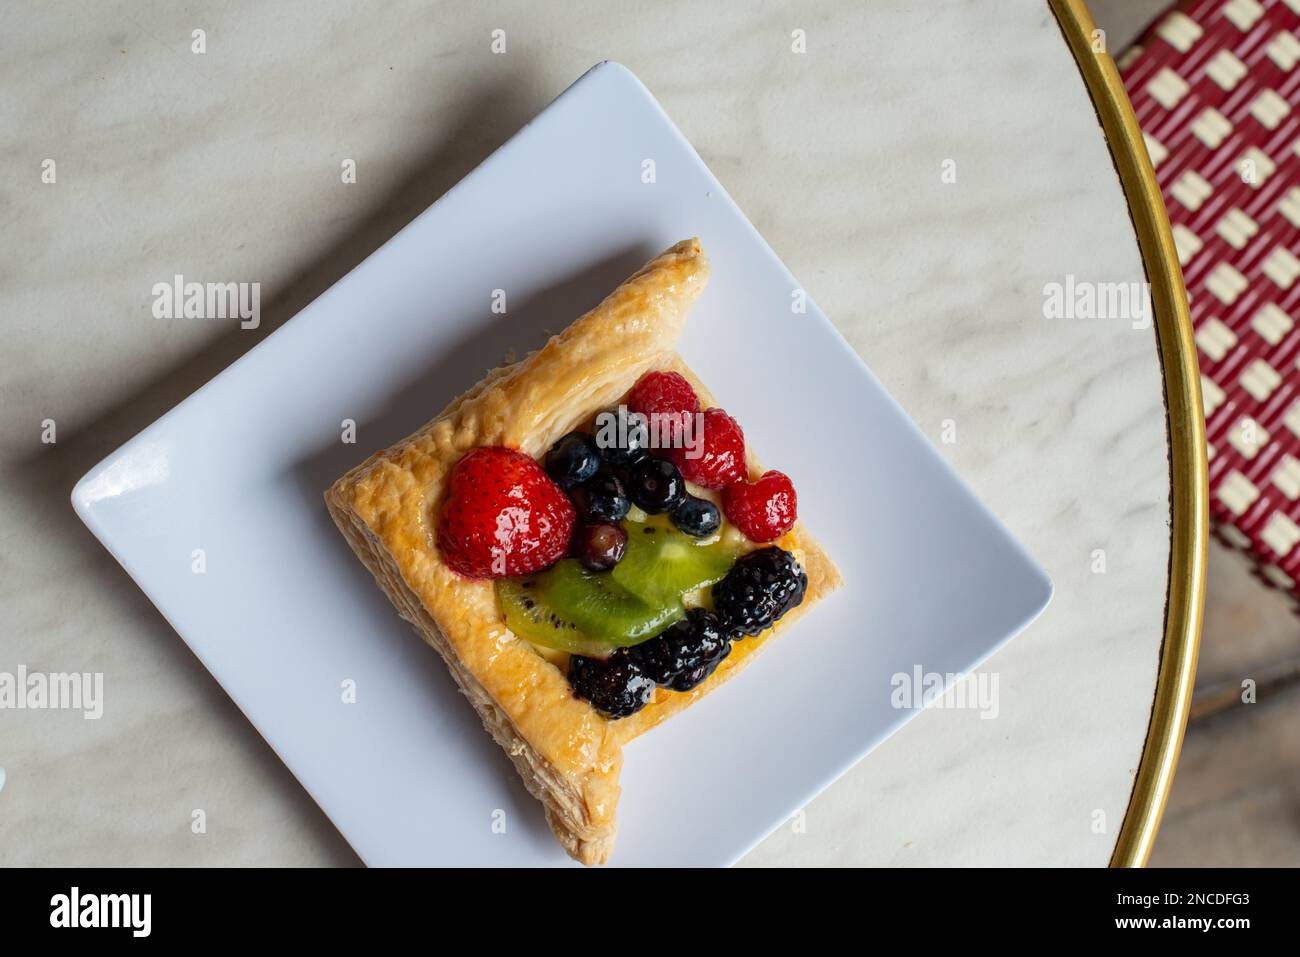 A square fruit filled French puff pastry on a white square plate. The cream and custard filled dessert has strawberries, kiwi, and blackberries on top Stock Photo